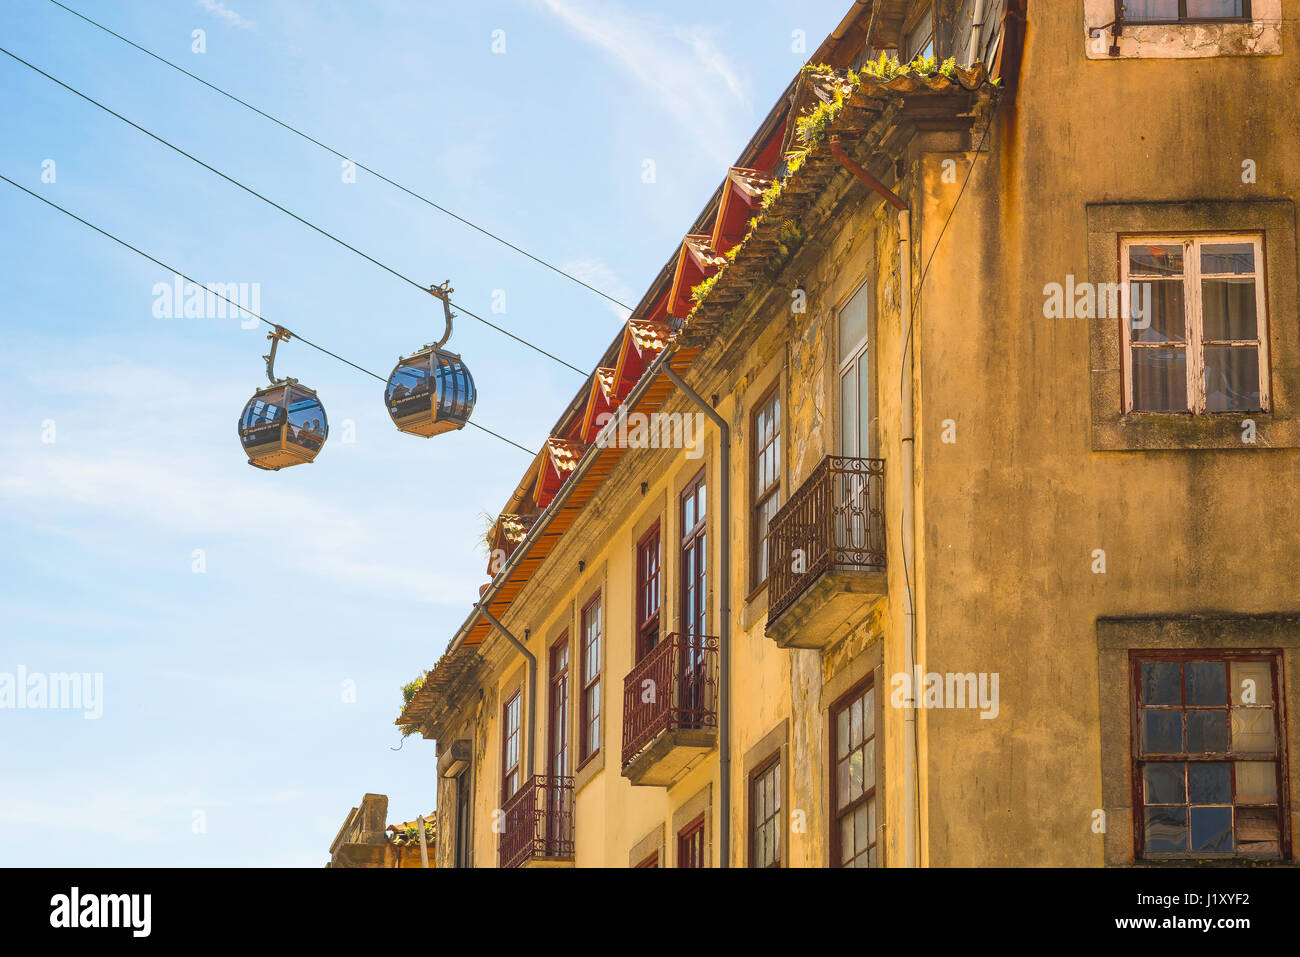 Gaia cable car, view of a pair of cable cars carrying tourists high above the streets of the Gaia district in the city of Porto, Oporto, Portugal Stock Photo